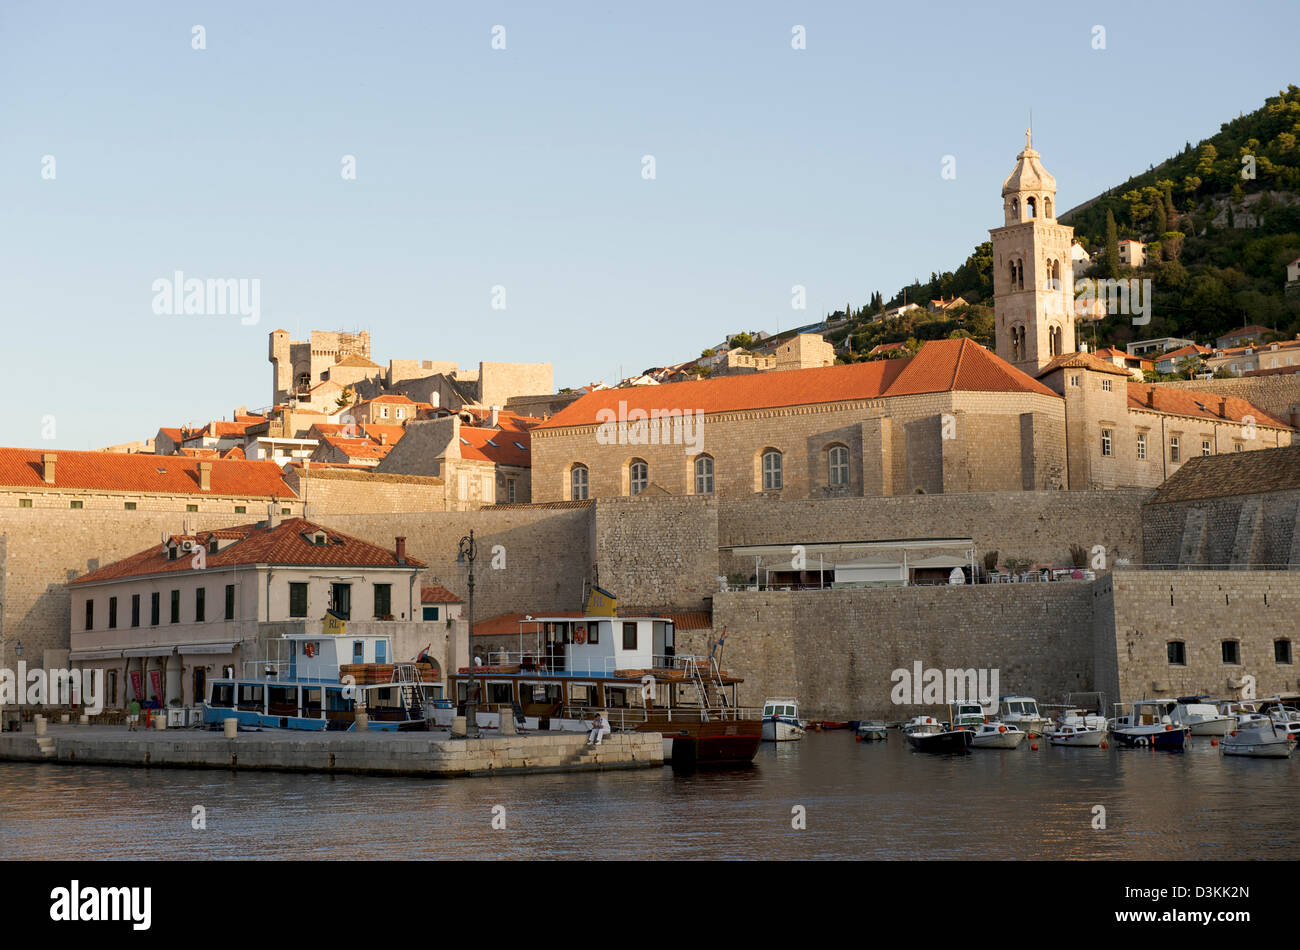 View of the old harbour of Dubrovnik, Croatia, shot taken at dawn Stock Photo